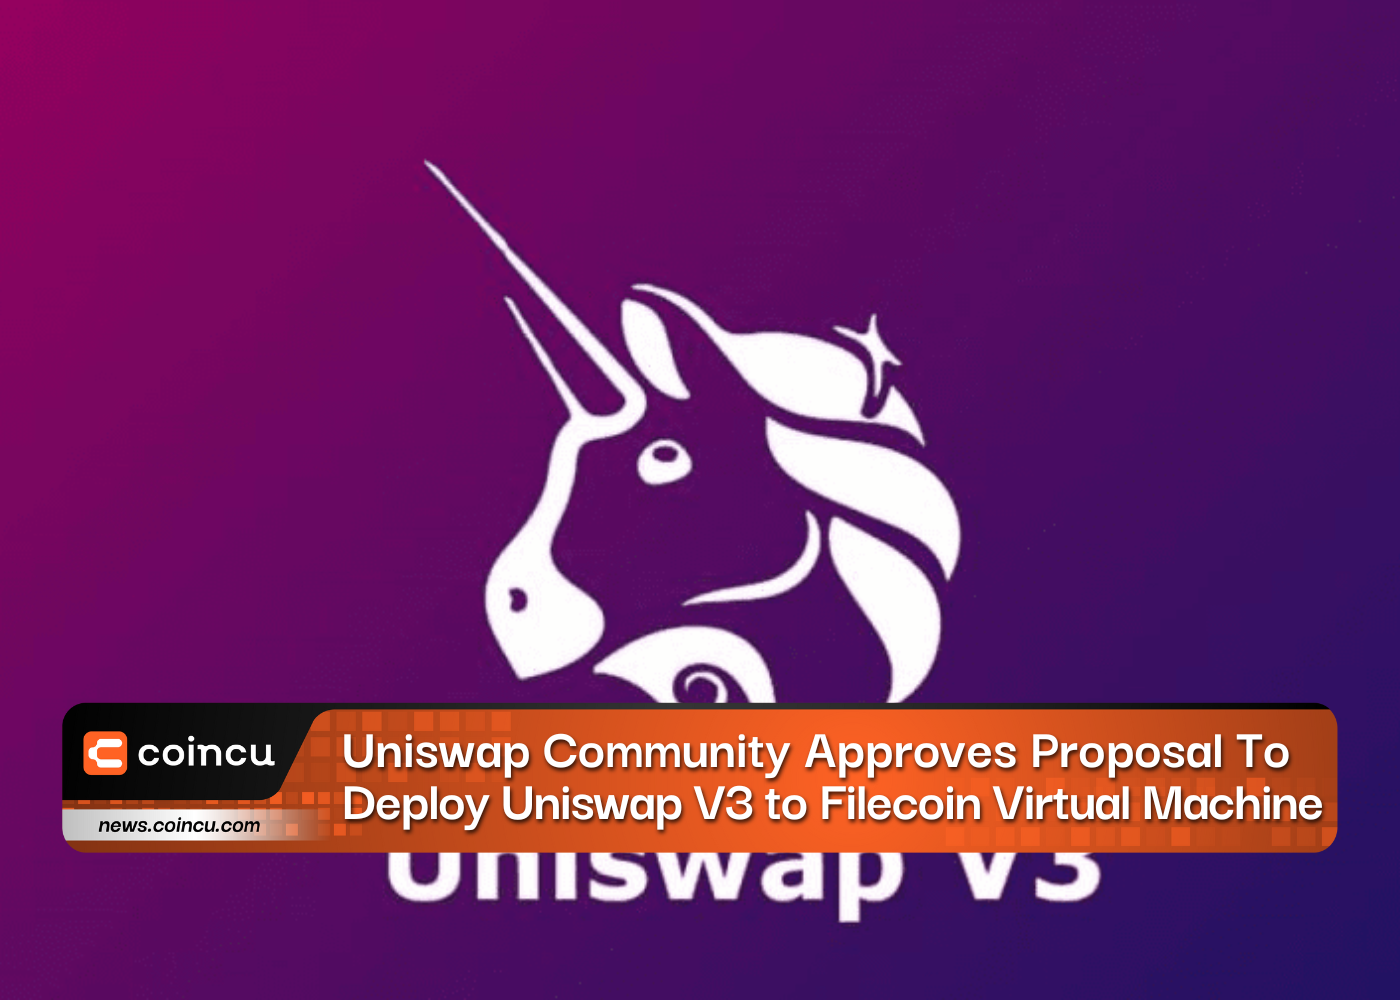 Uniswap Community Approves Proposal To